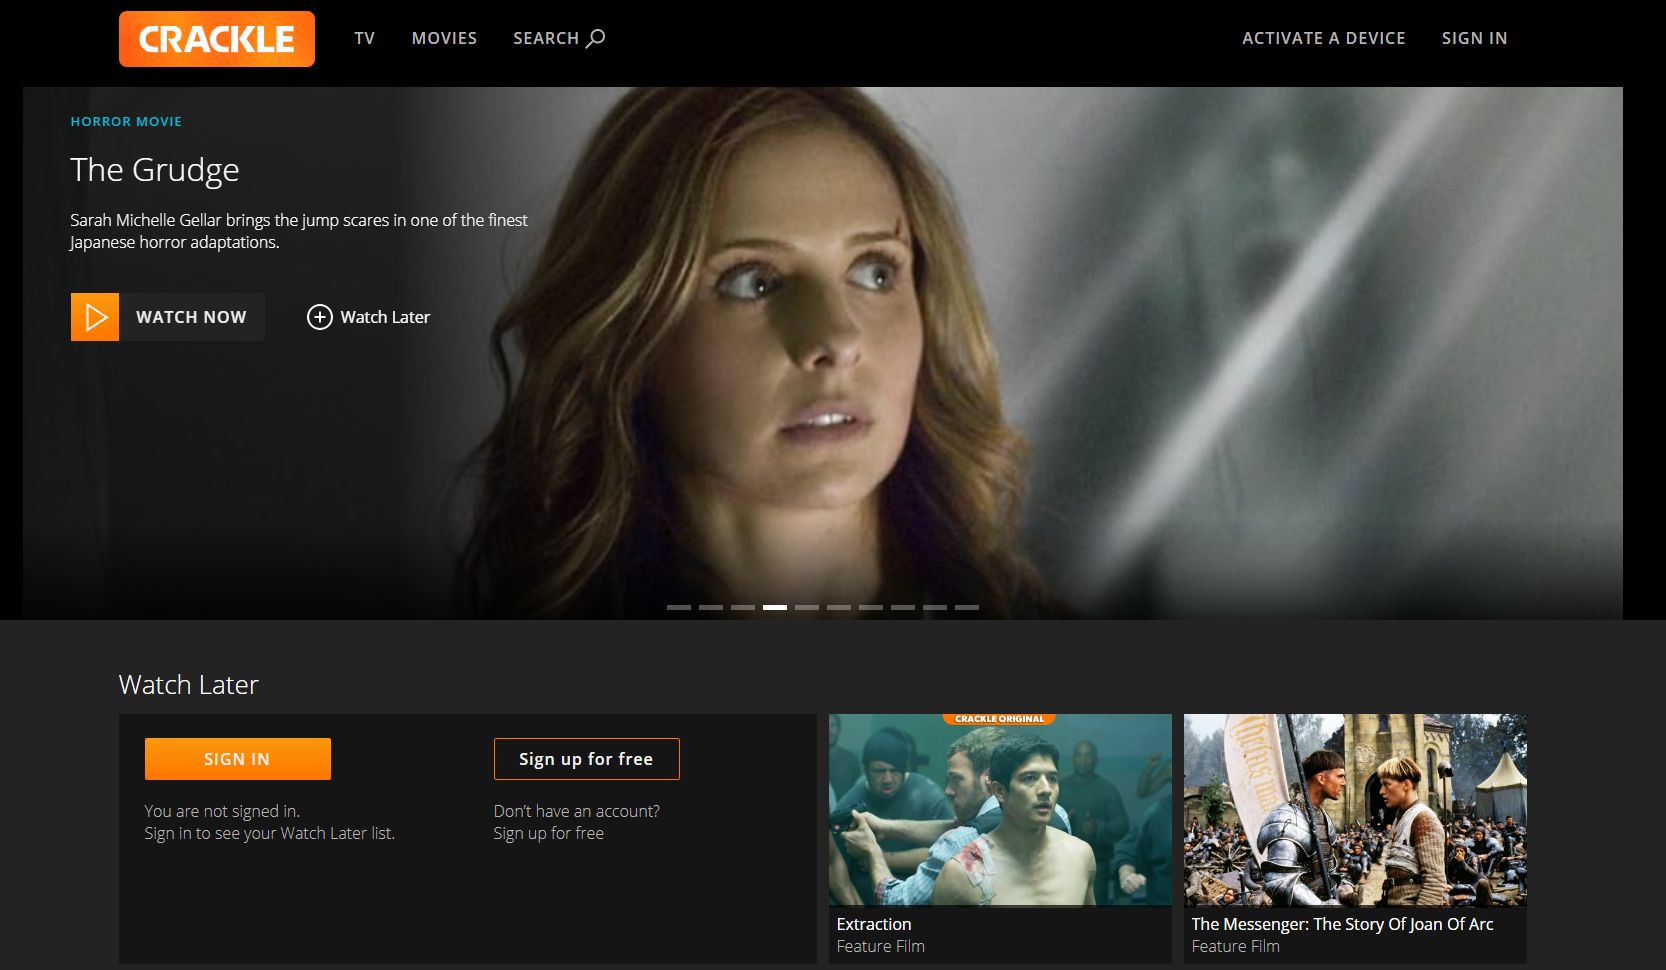 Crackle screenshot showing available shows and films.